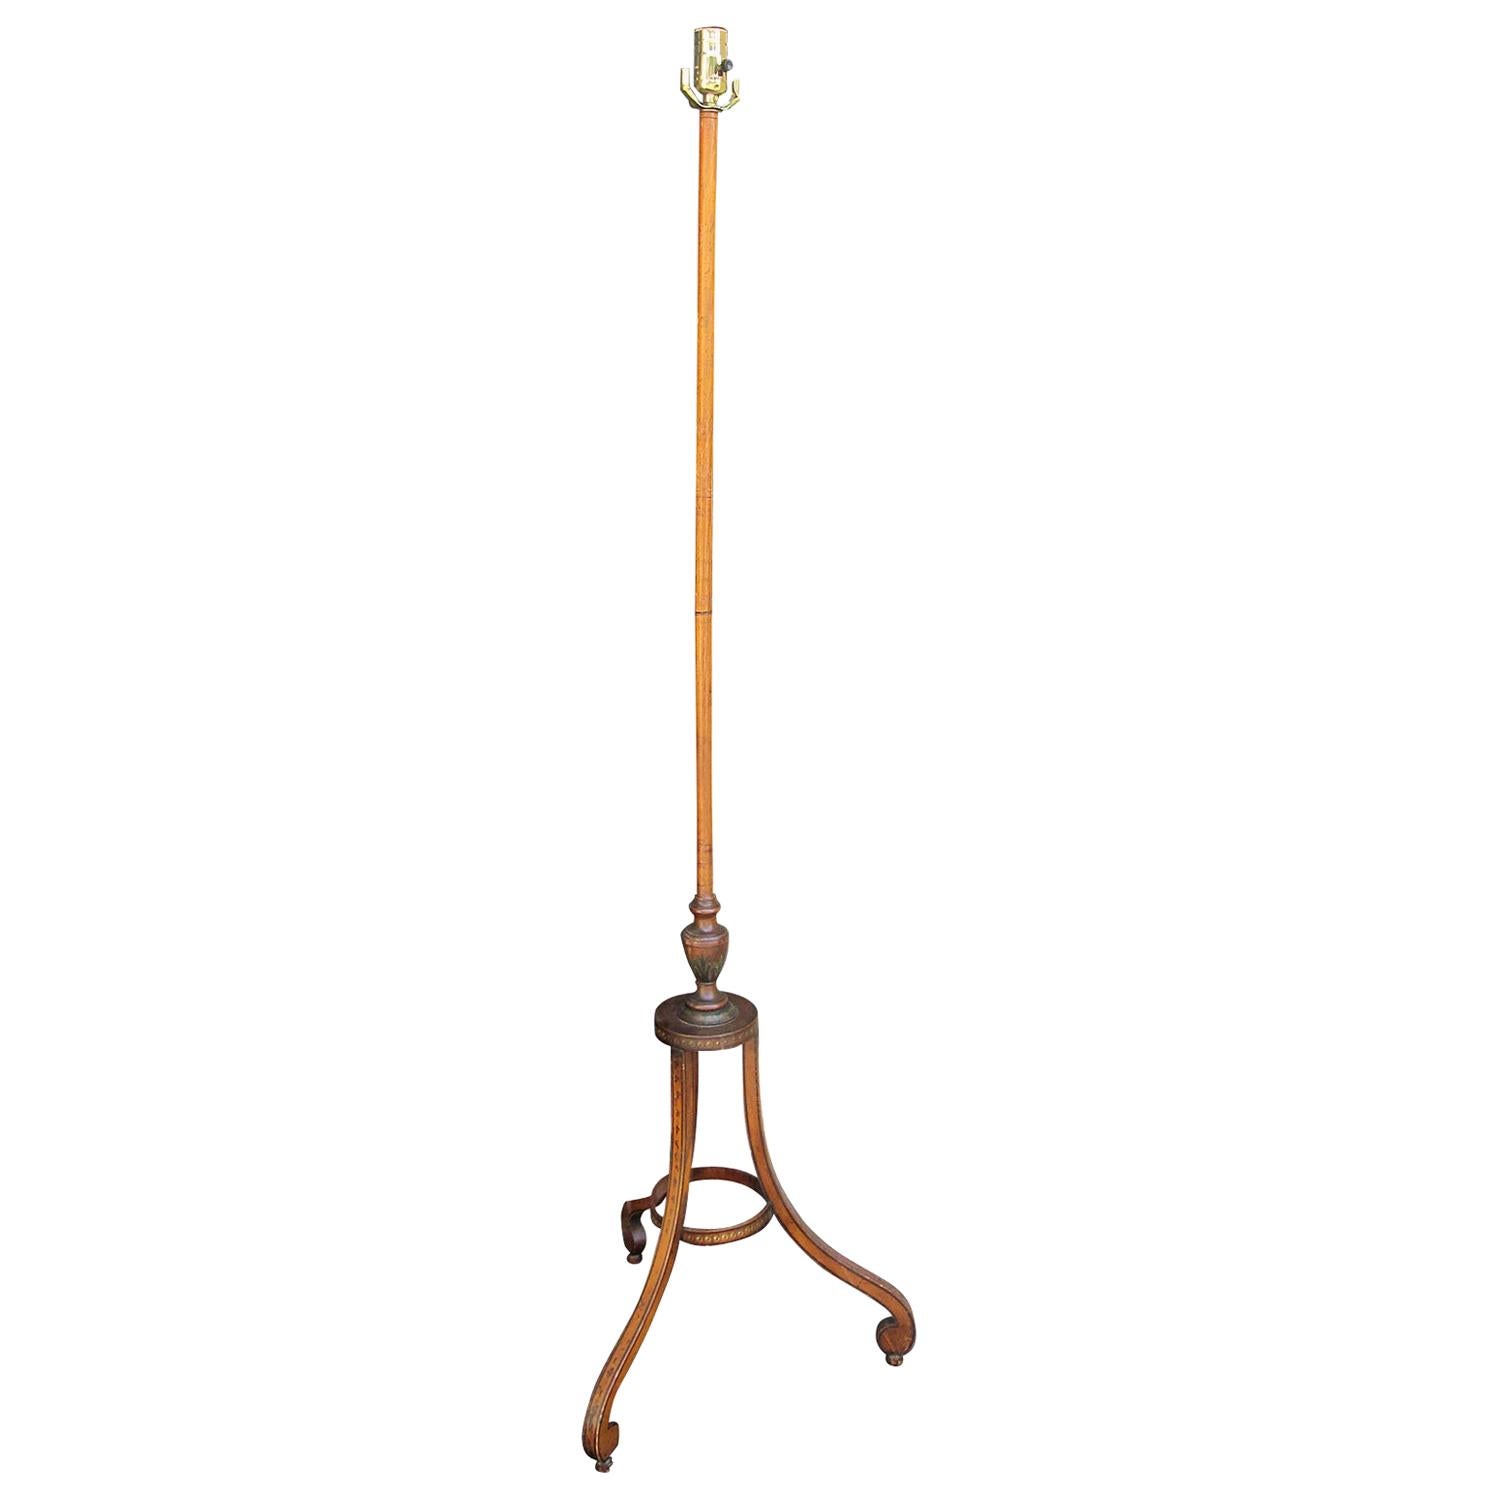 19th Century English Screen Pole as Floor Lamp with Painted Detail